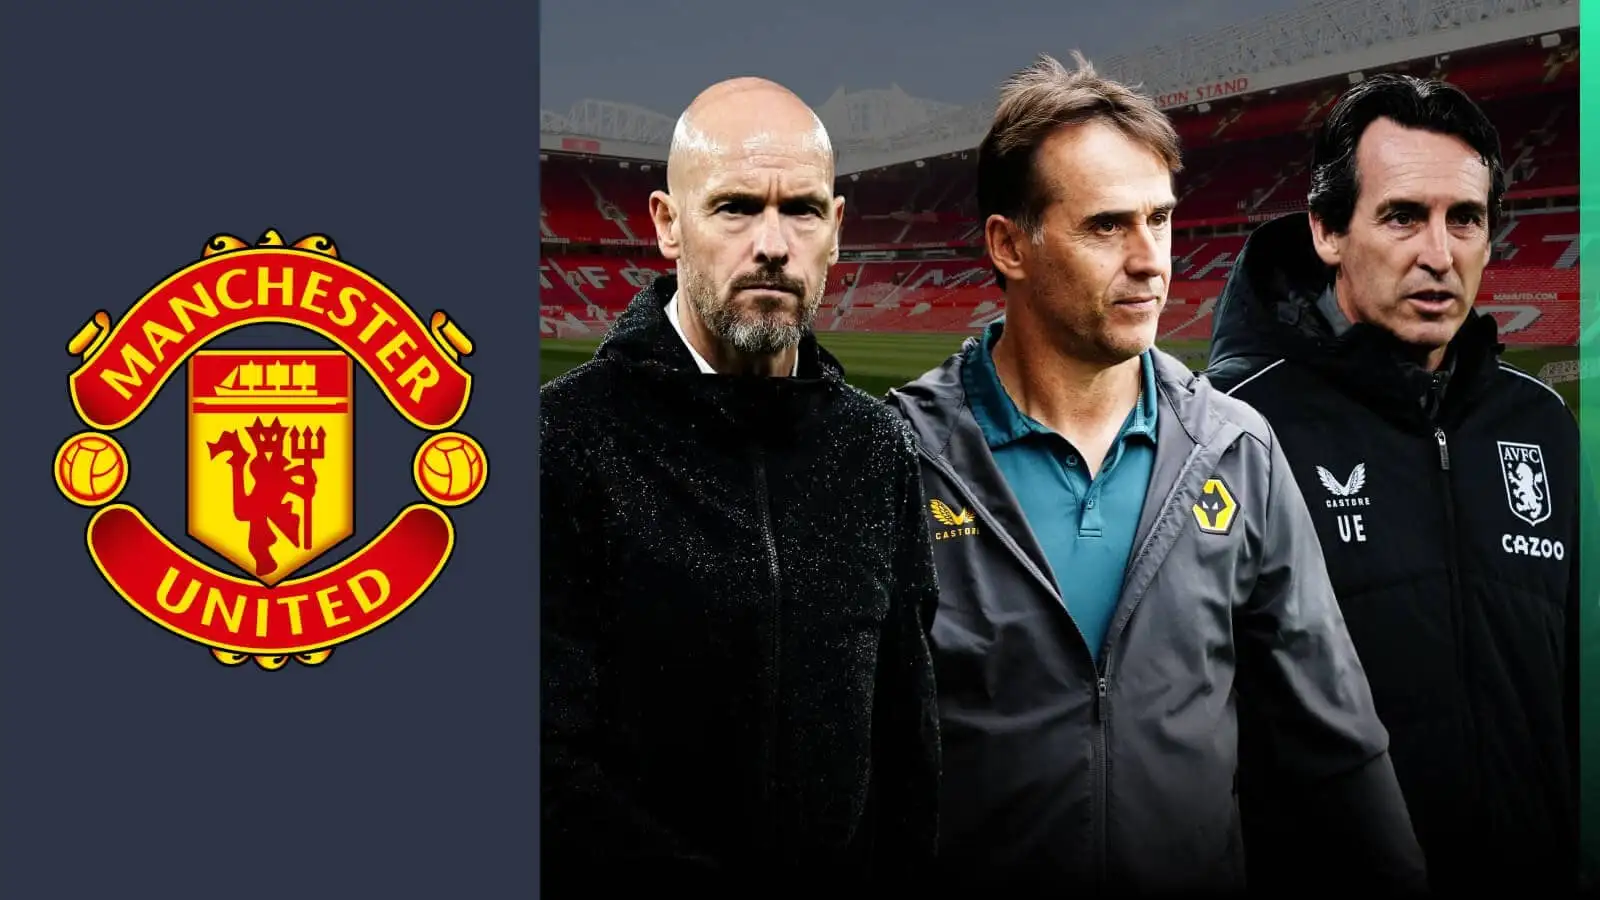 Julen Lopetegui and Unai Emery have been linked with replacing Erik ten Hag as Manchester United manager